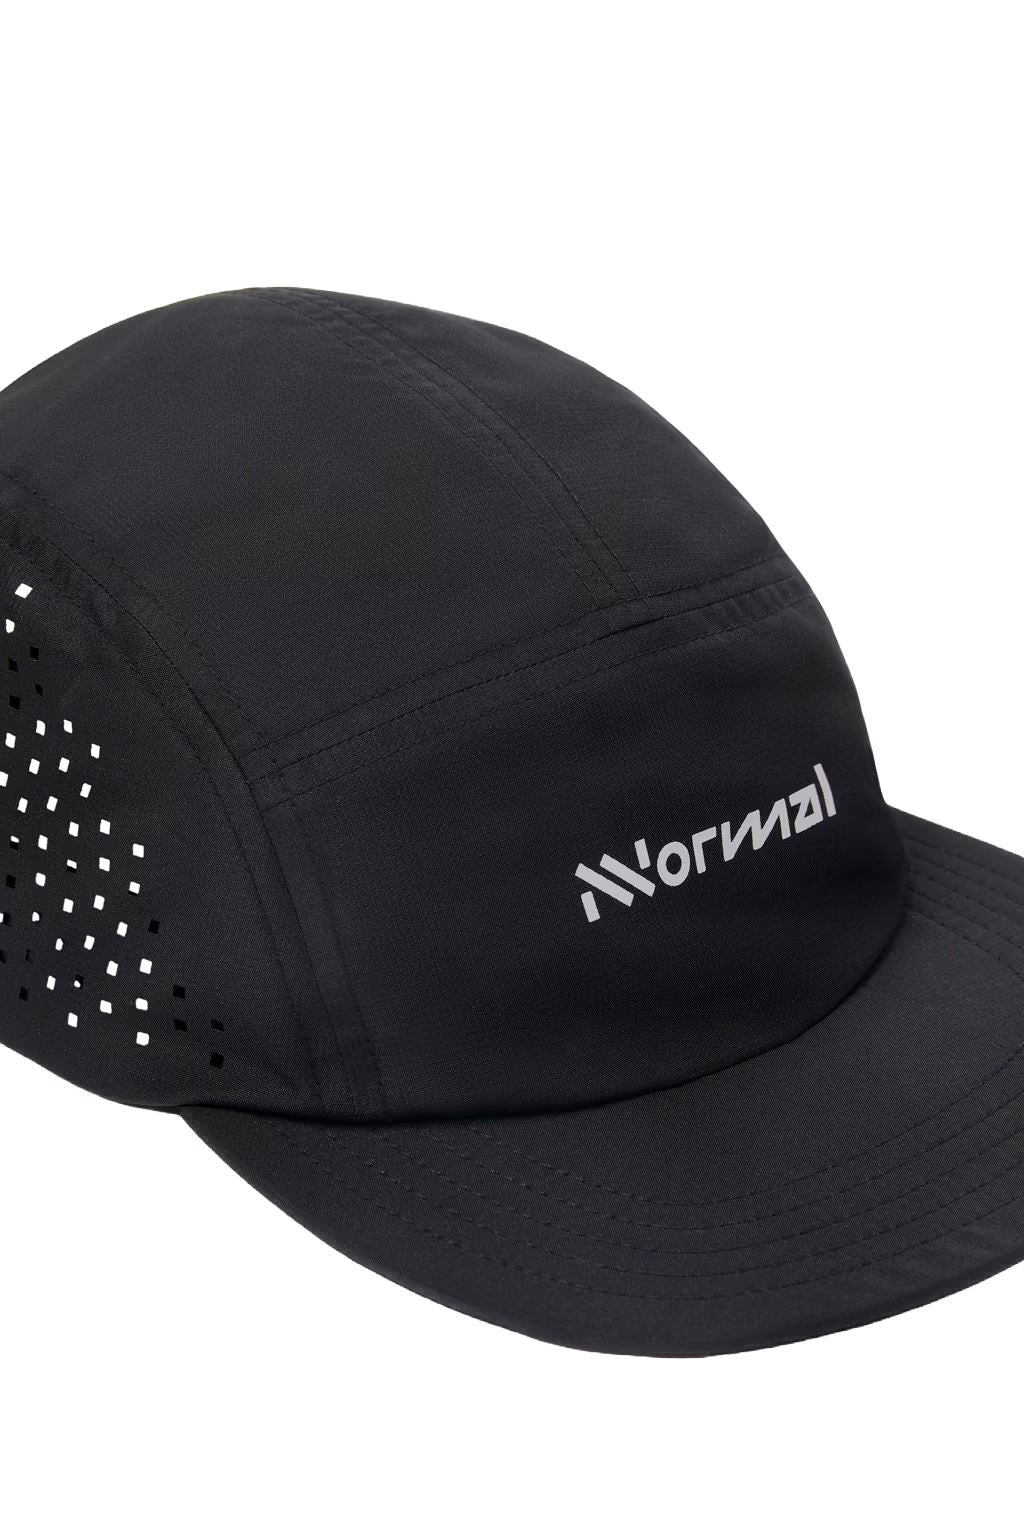 NNormal Race Cap N1ARC03 Black One Size 